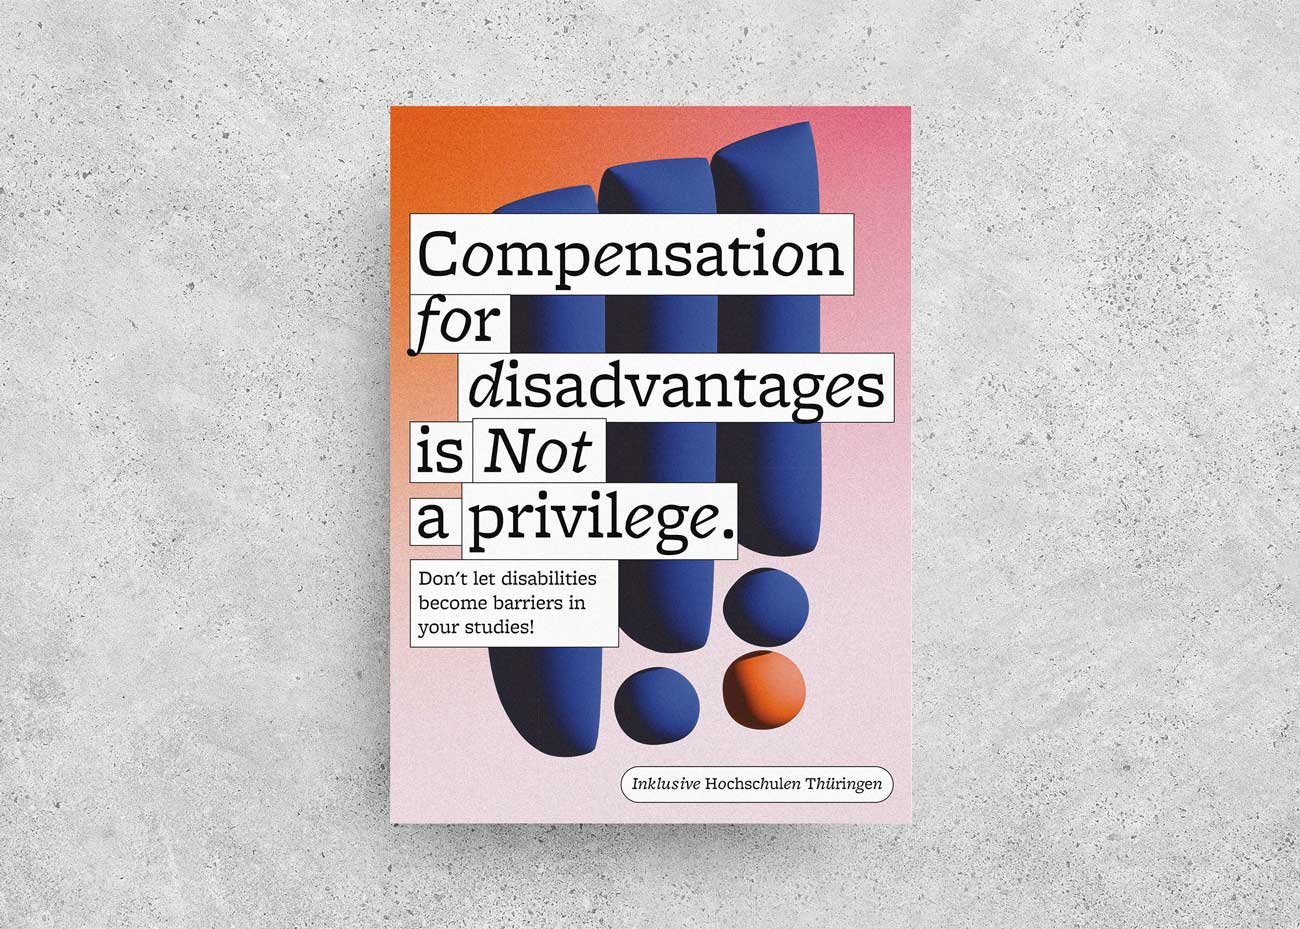 Die Postkarte auf Englisch mit dem Titel „Compensation for disadvantage is not a privilege. Don't let disabilities become barriers in your studies.